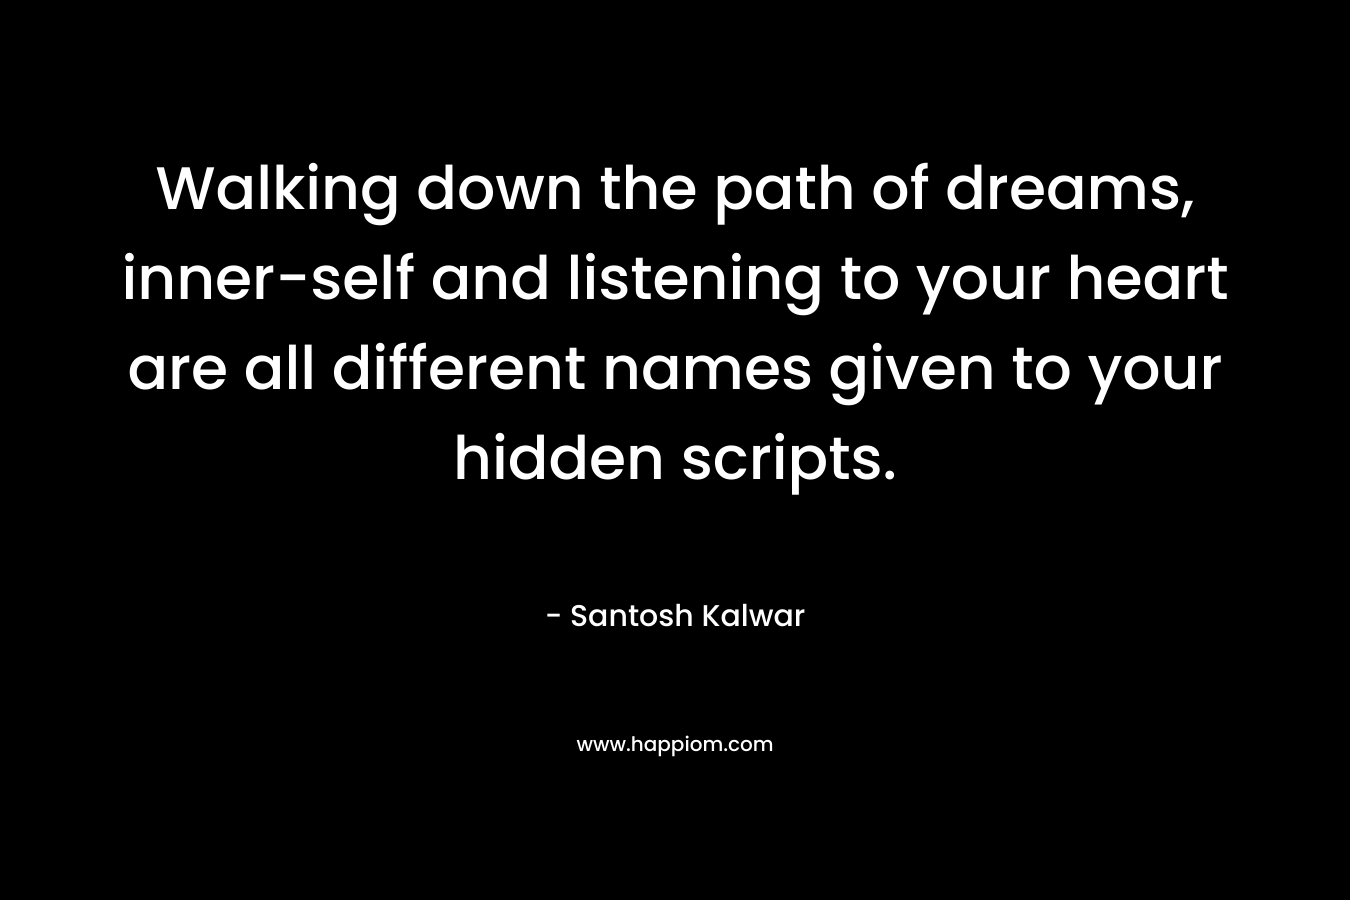 Walking down the path of dreams, inner-self and listening to your heart are all different names given to your hidden scripts.  – Santosh Kalwar